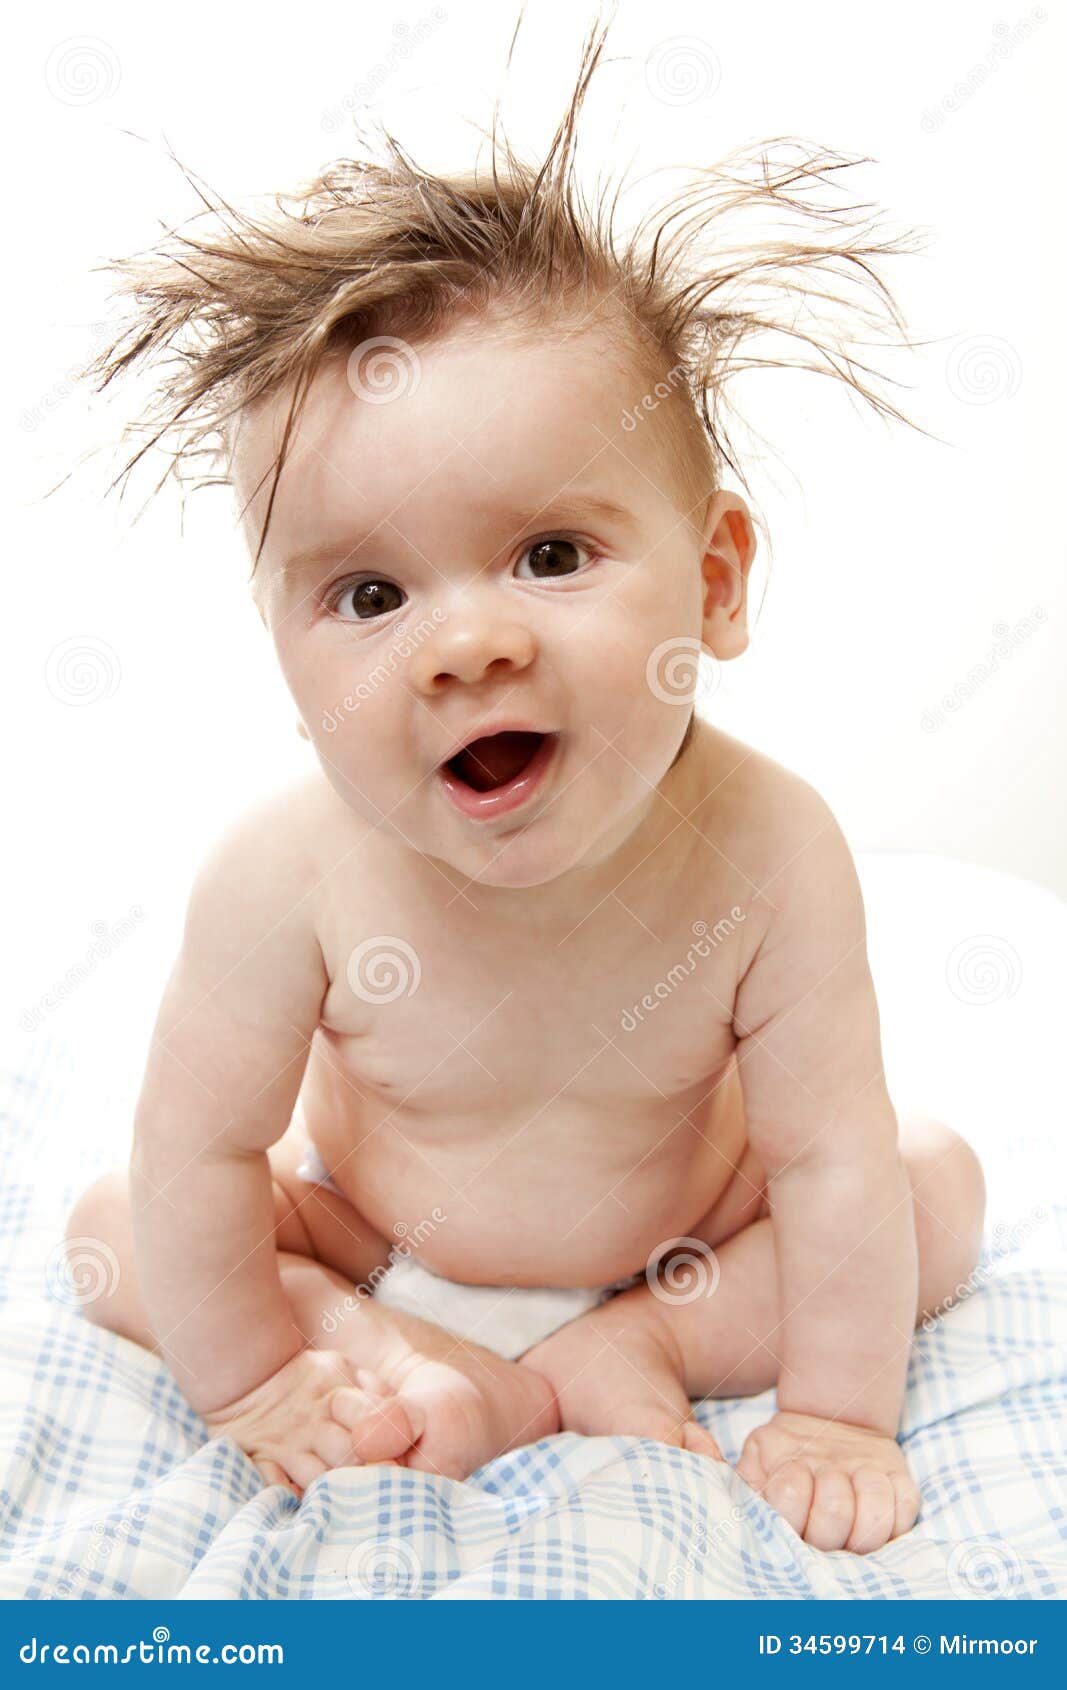 Litte Boy With Very Long Hair Stock Photo Image Of Funny Clean